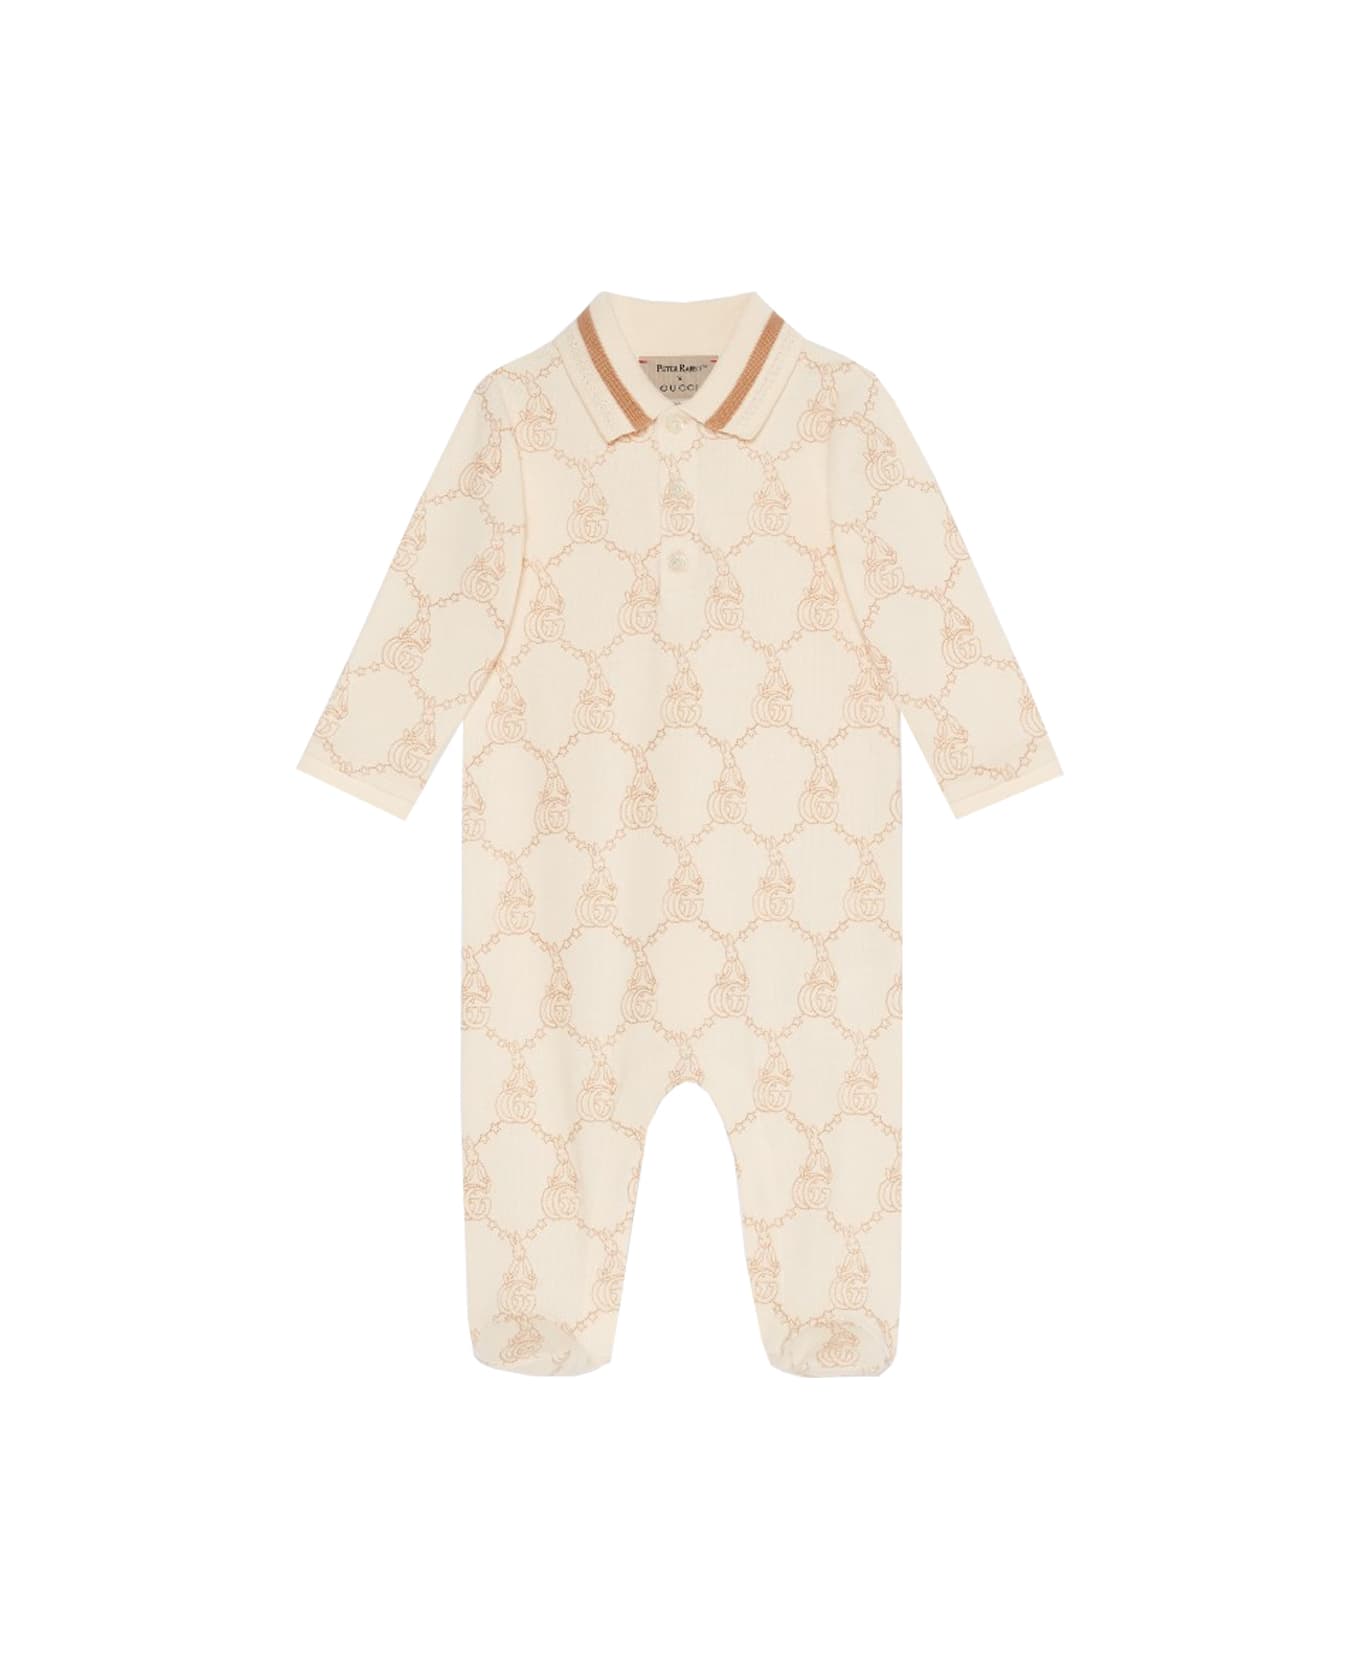 Gucci Romper With Embroidery - Beige